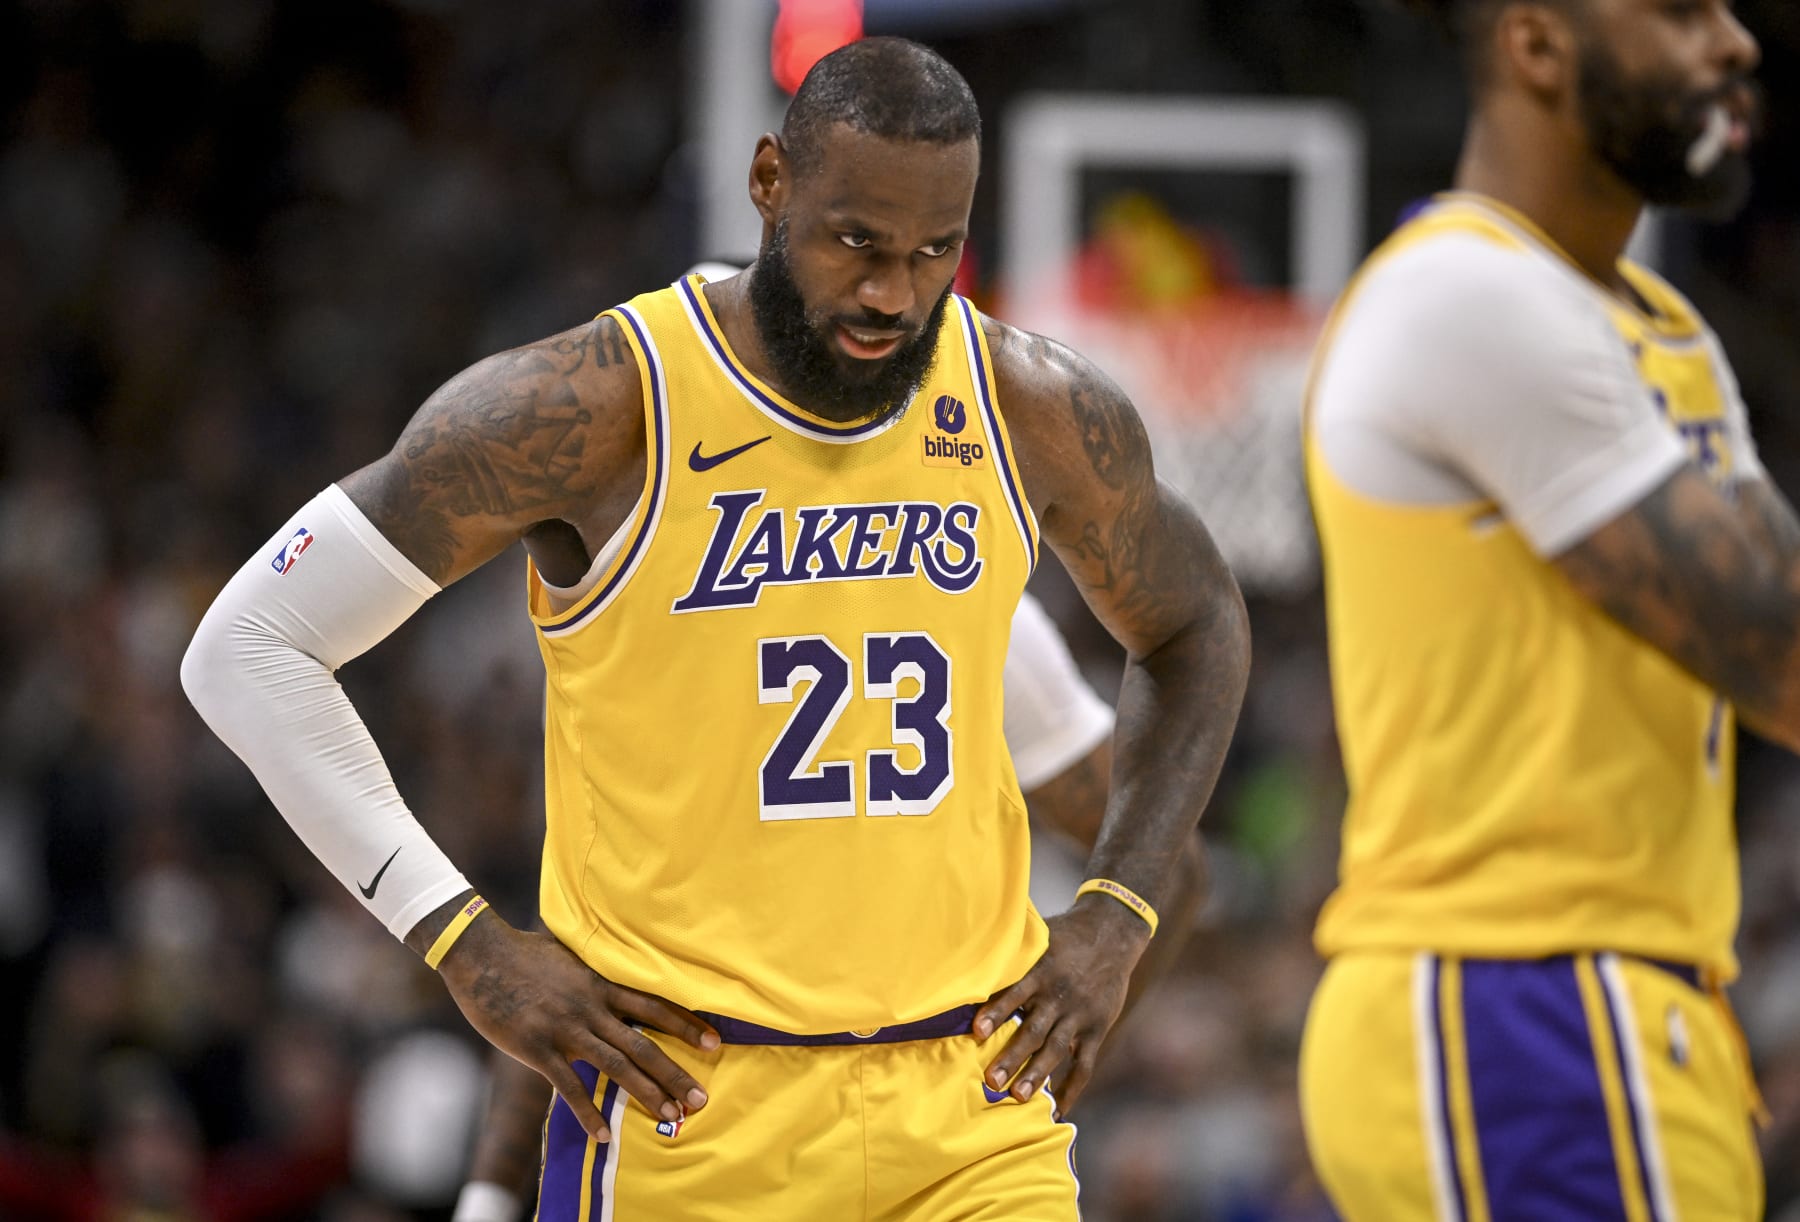 Lakers' LeBron James is undecided about his future amid rumors of an NBA exit from the playoffs